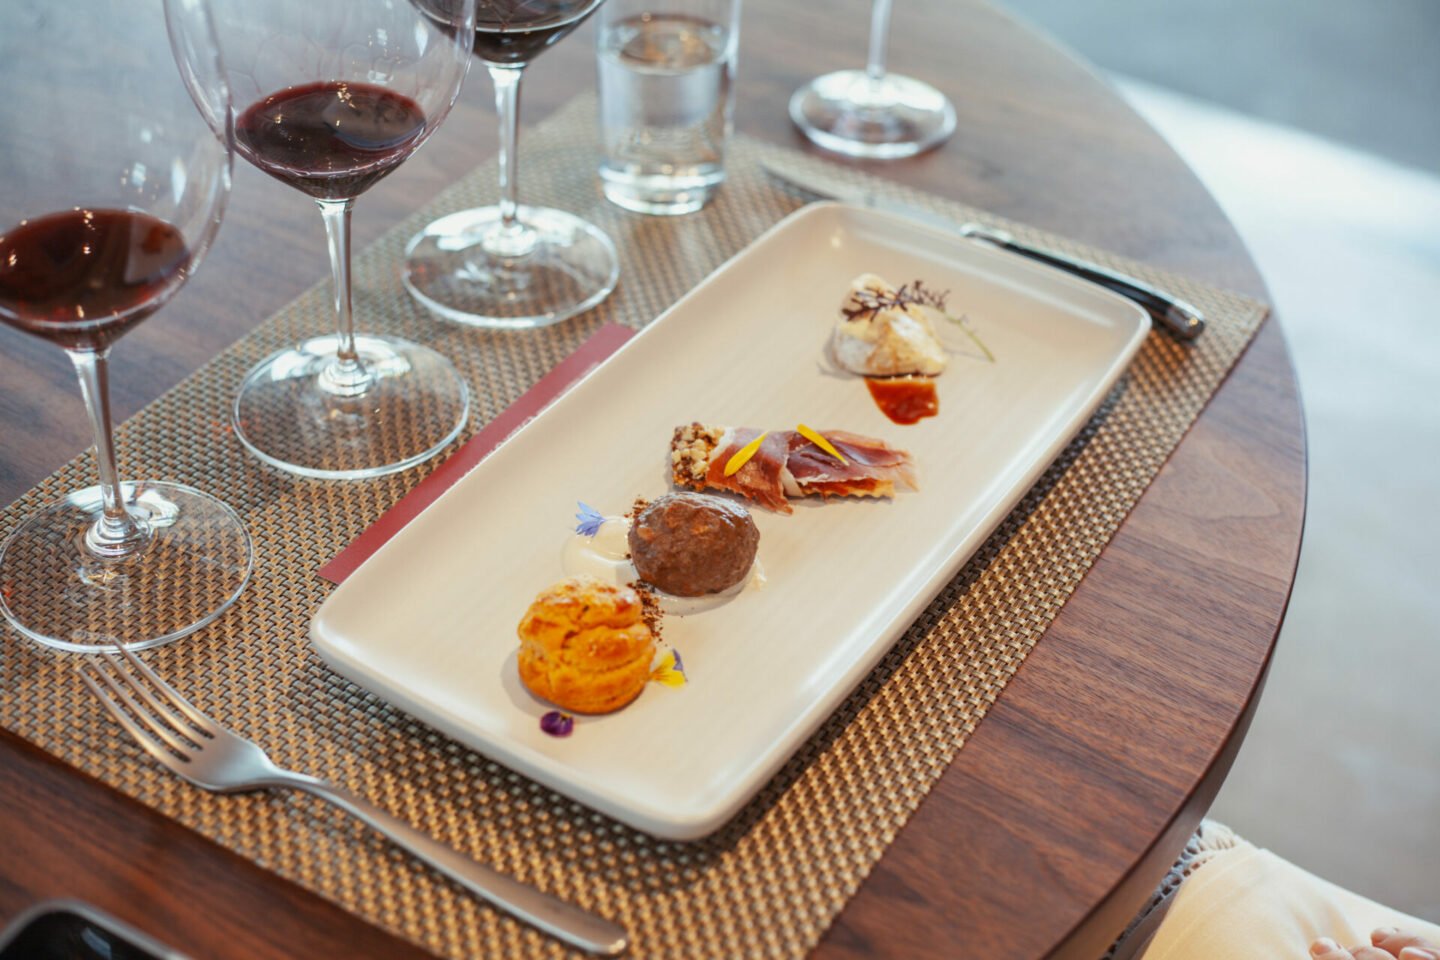 Food and wine pairing at Clif Family Winery